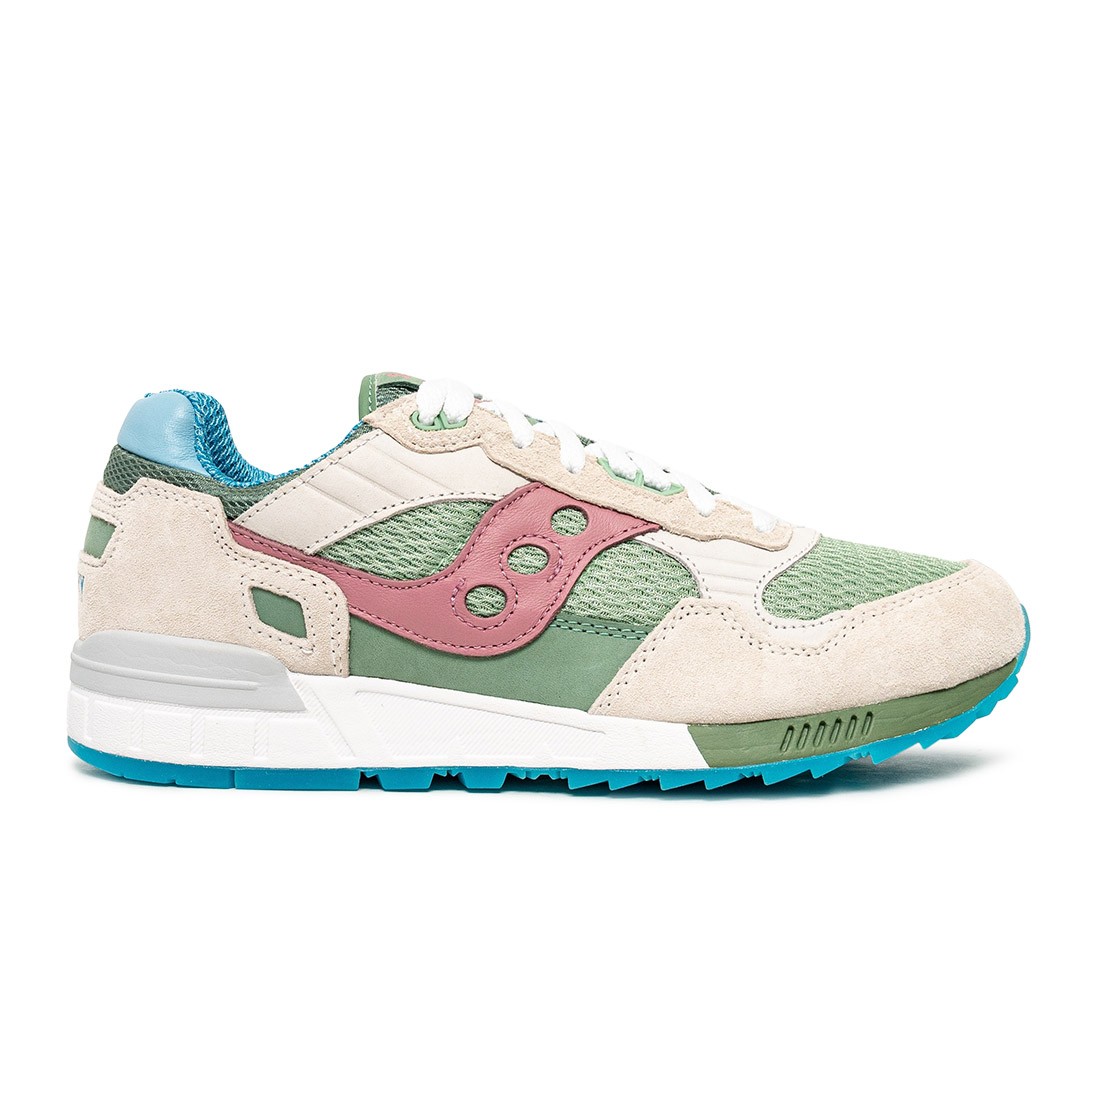 Frank Cooke x Saucony Jazz 81 Will be Sold Exclusively at APB More